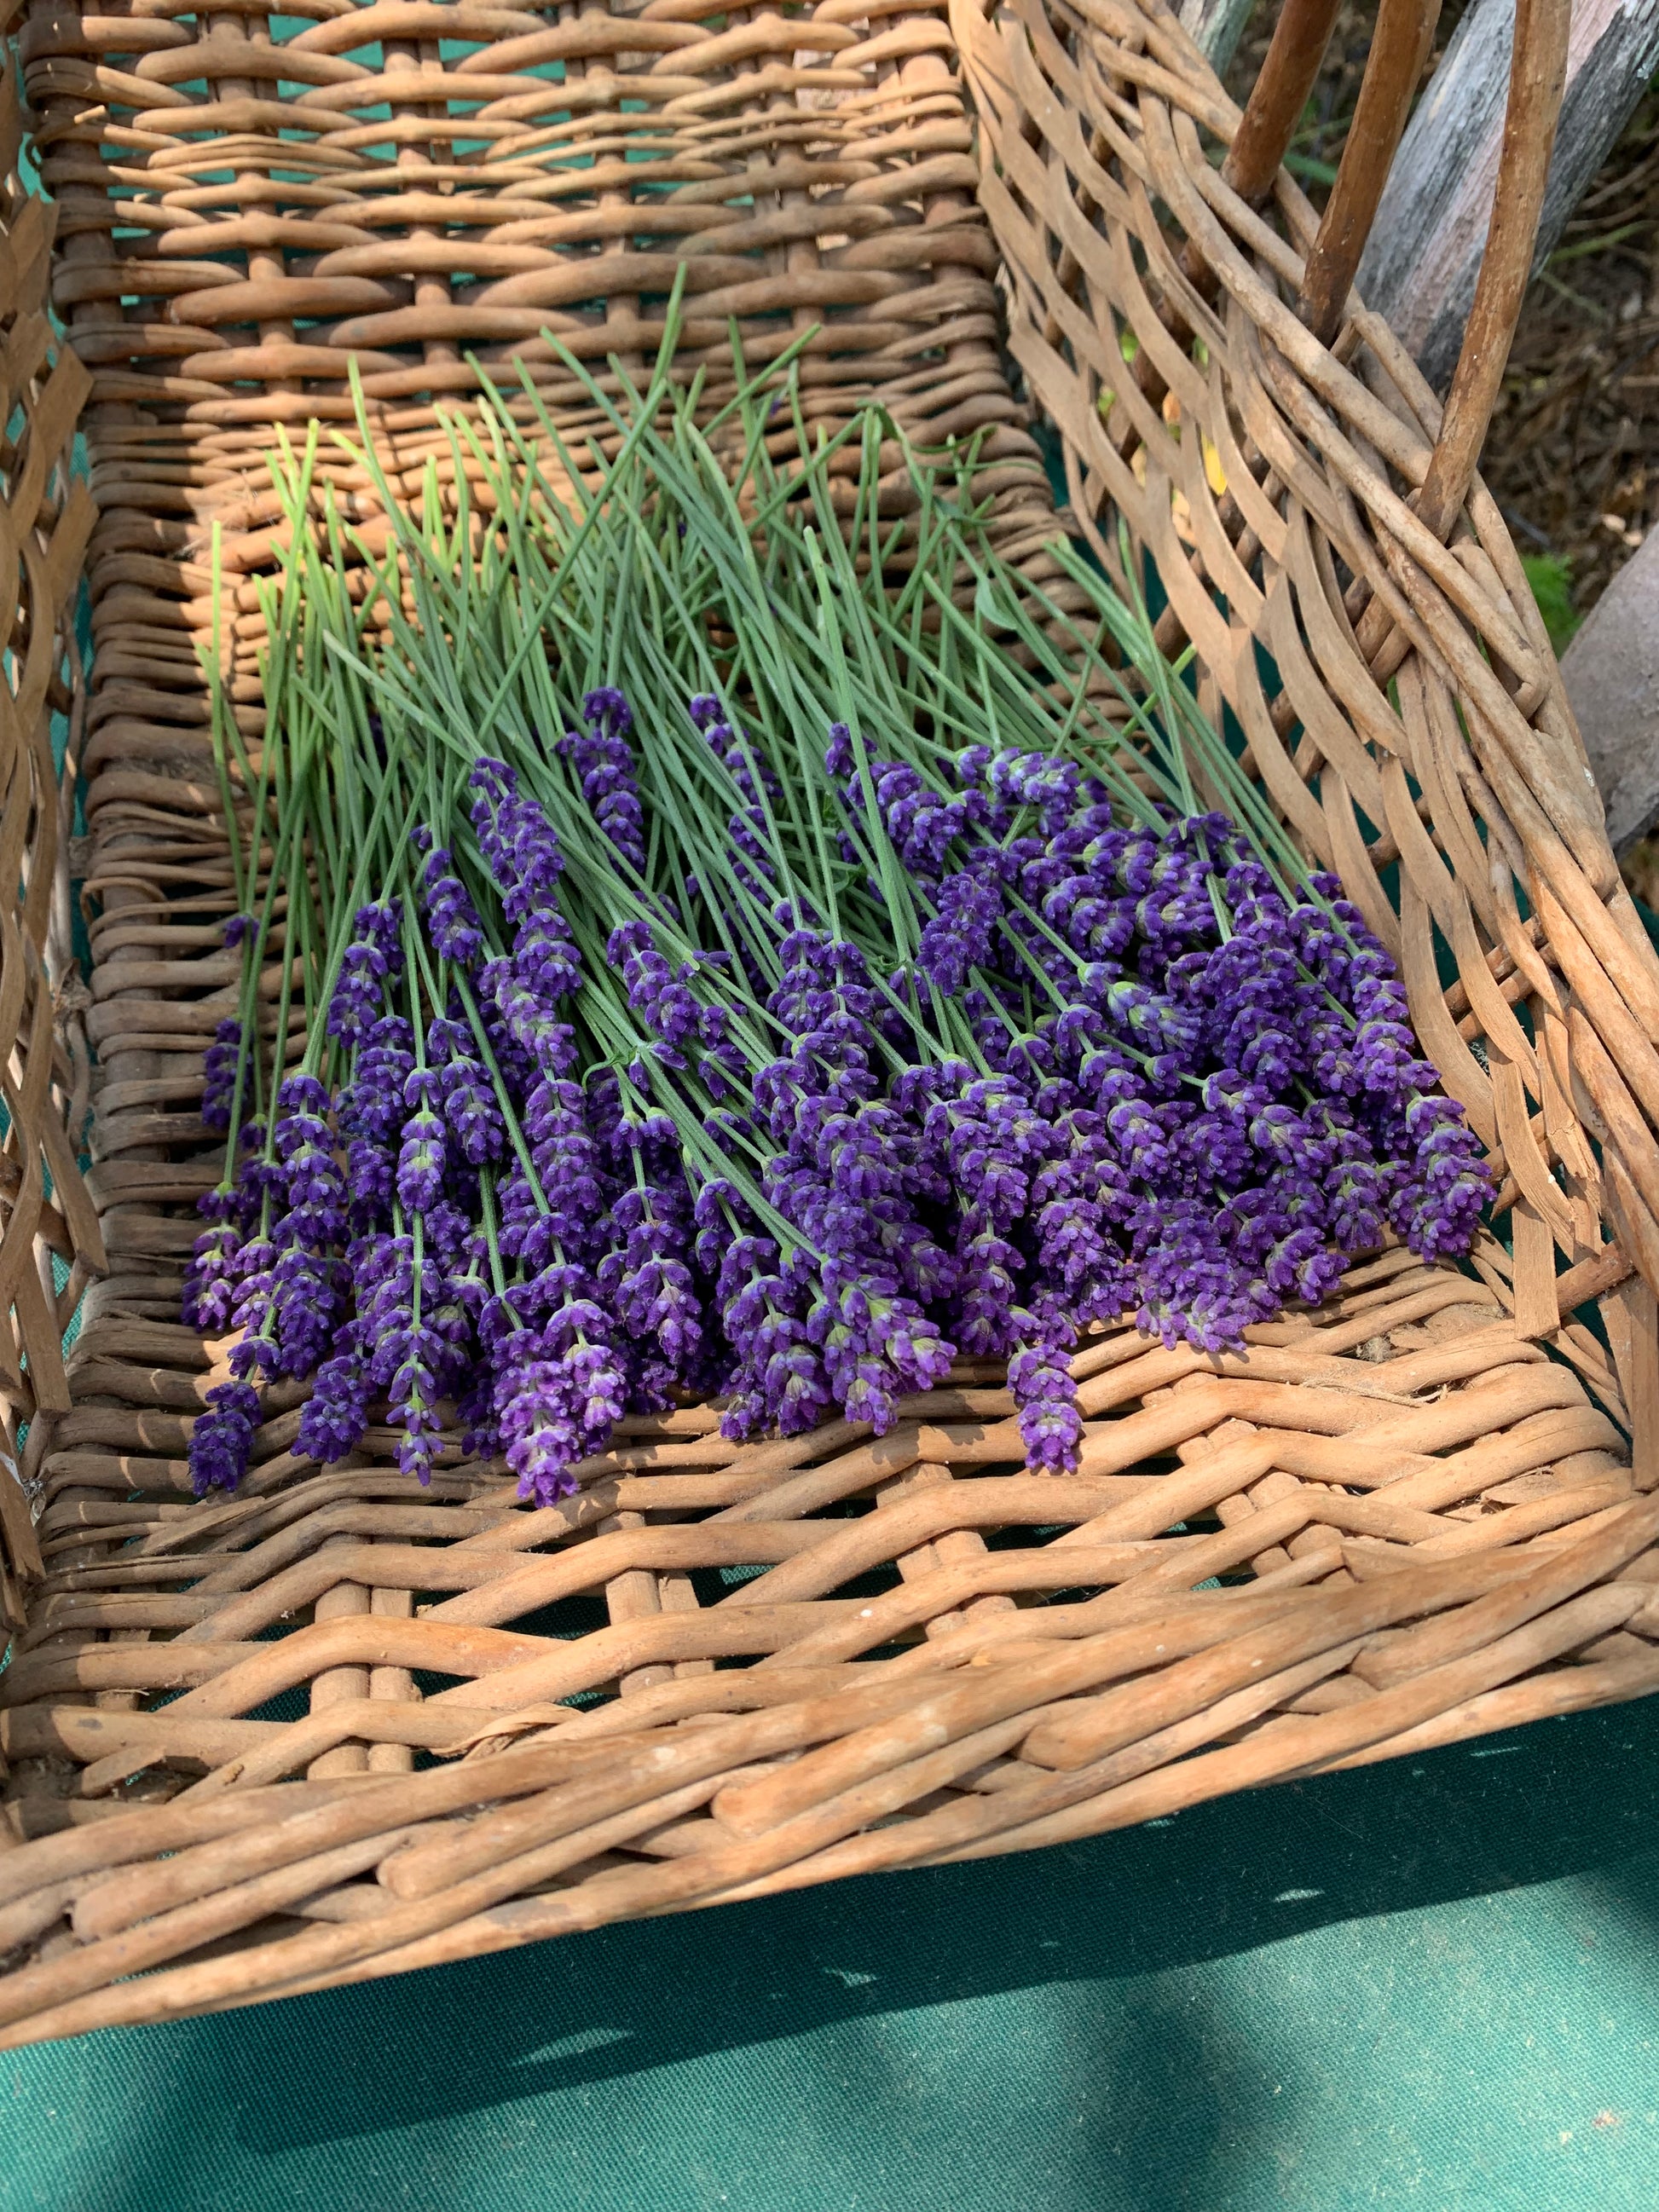 English Lavender ready for drying